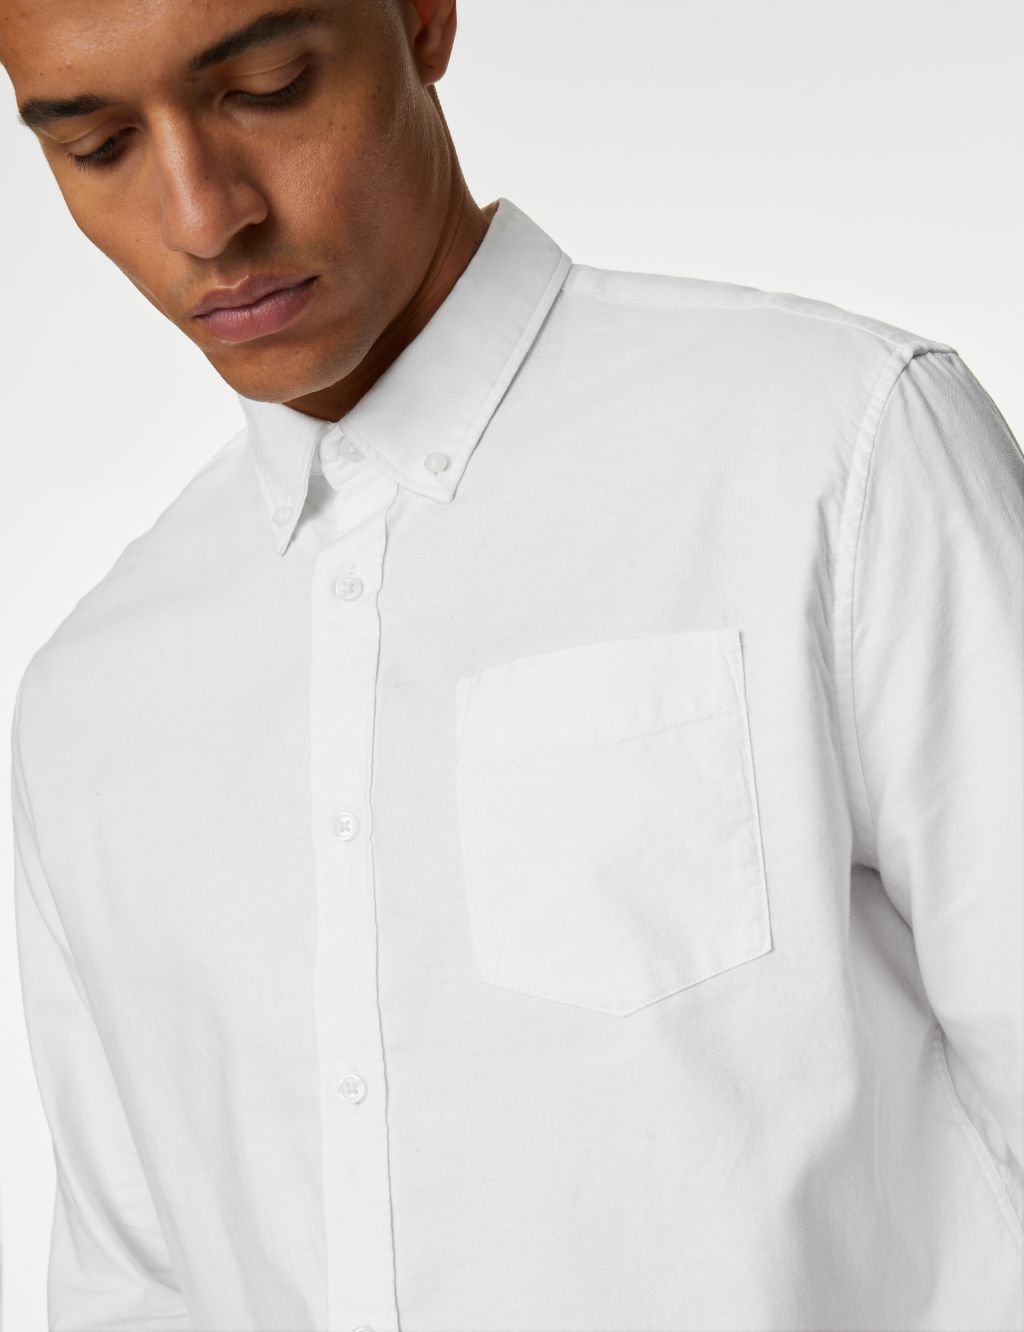 Men's Oxford Shirts Available at M&S